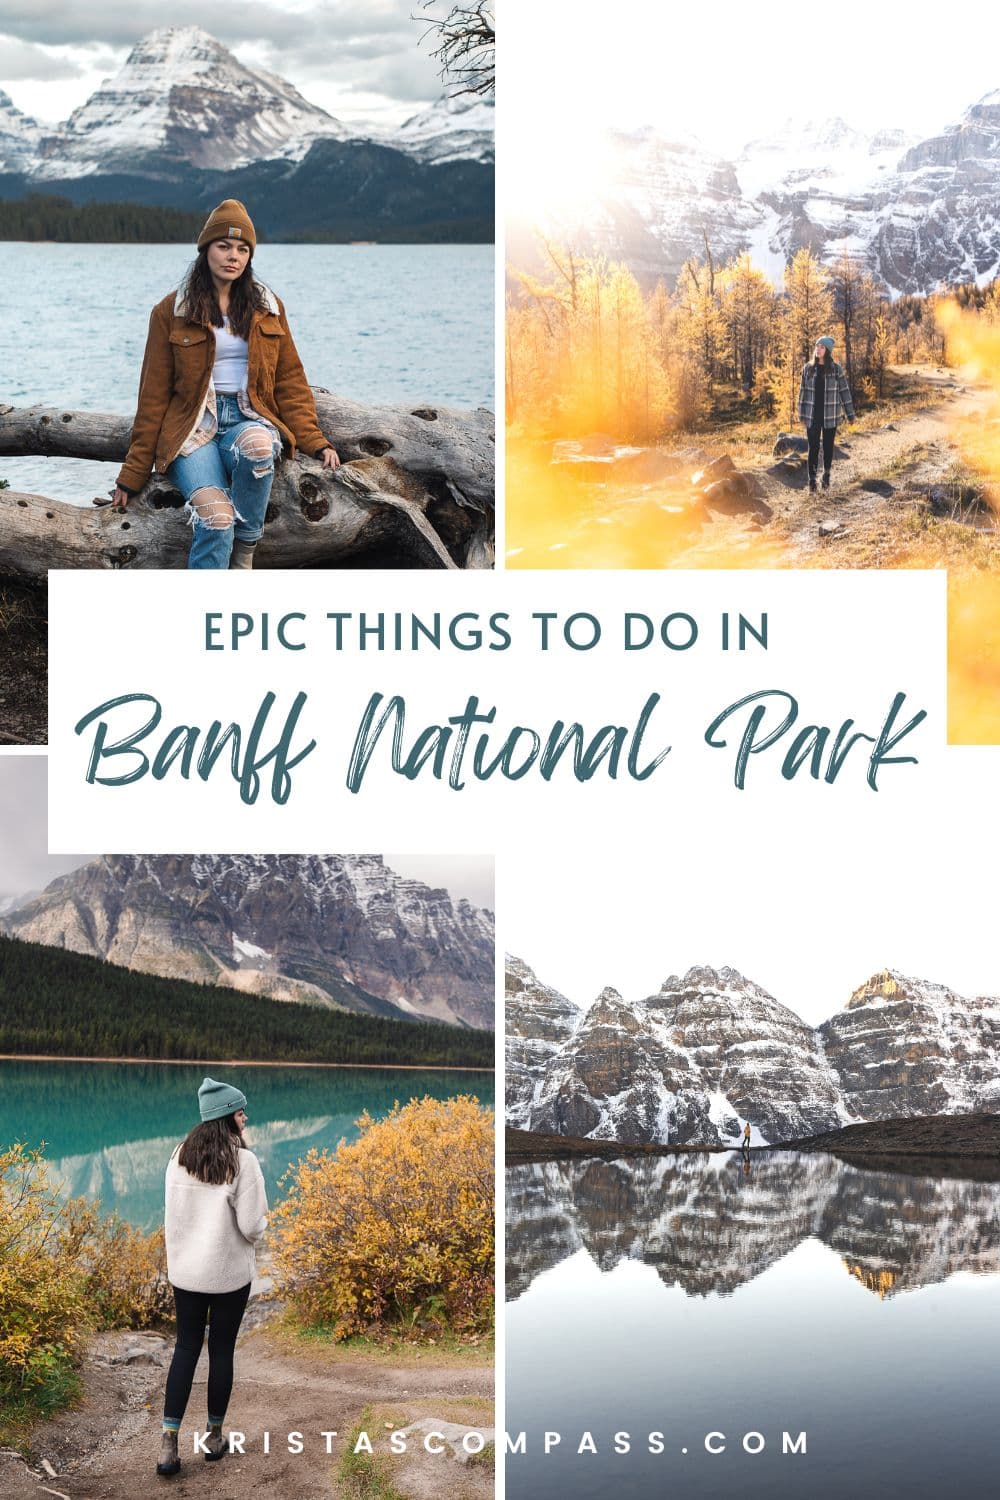 Here are the most epic things to do in Banff National Park during your trip to the Canadian Rockies! Take note of all the best hikes, sights and activities in Banff